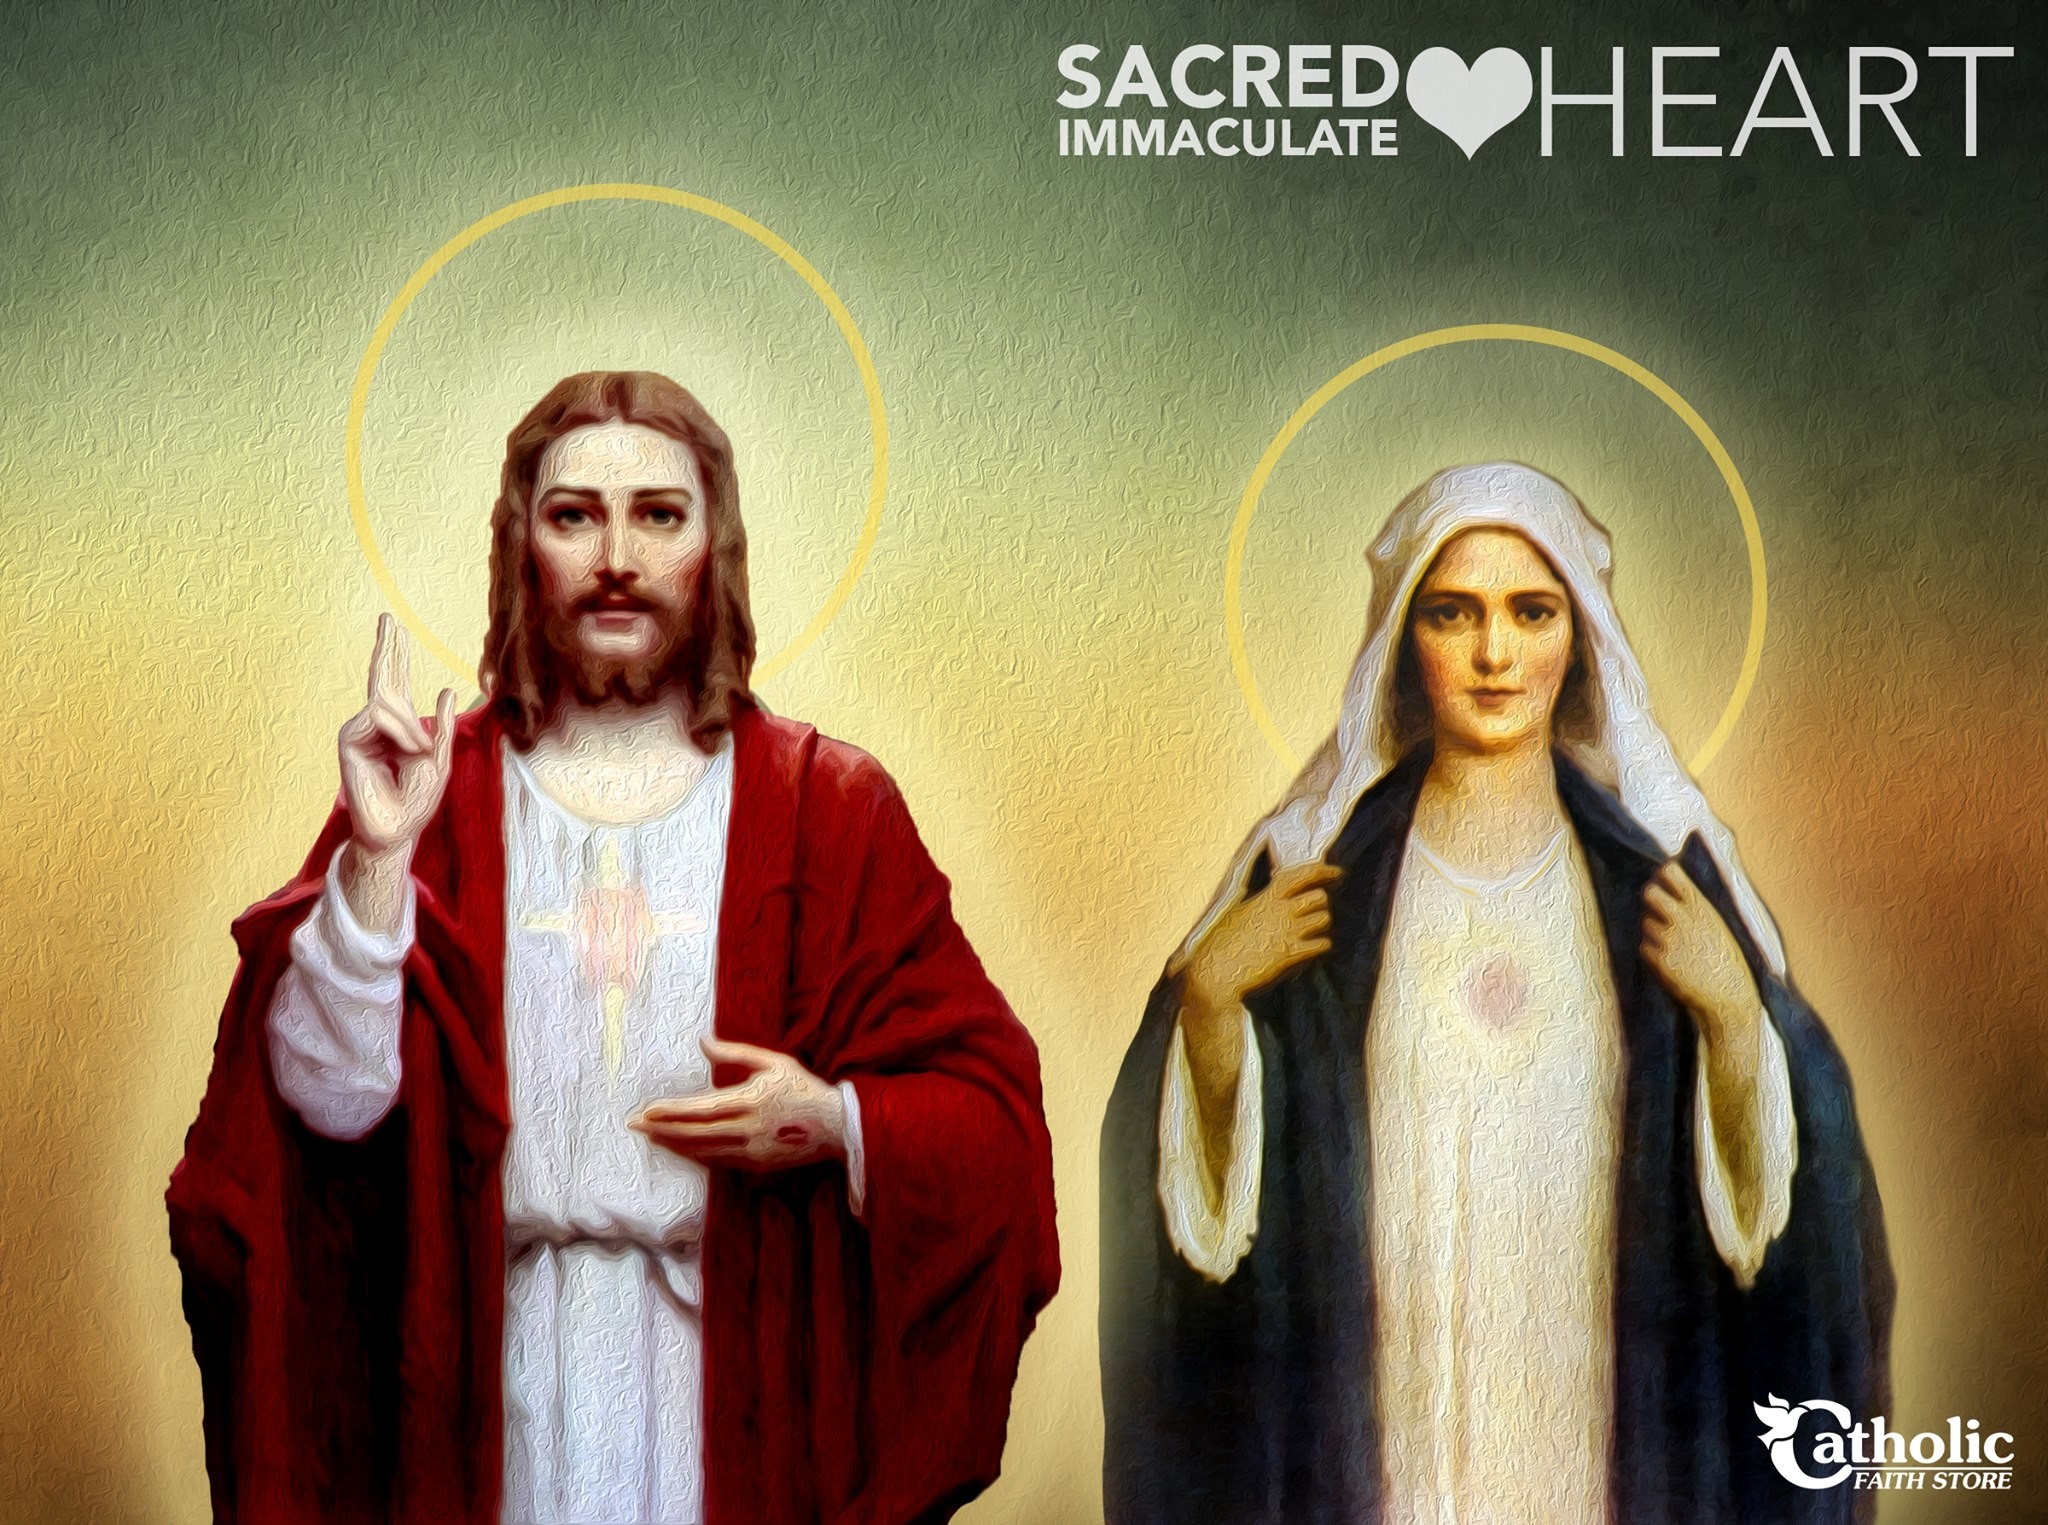 2048x1525  Sacred Heart — Immaculate Heart Blessed be the Most Loving Heart  and Sweet Name of Our Lord Jesus Christ and the most glorious Virgin Mary,  ...